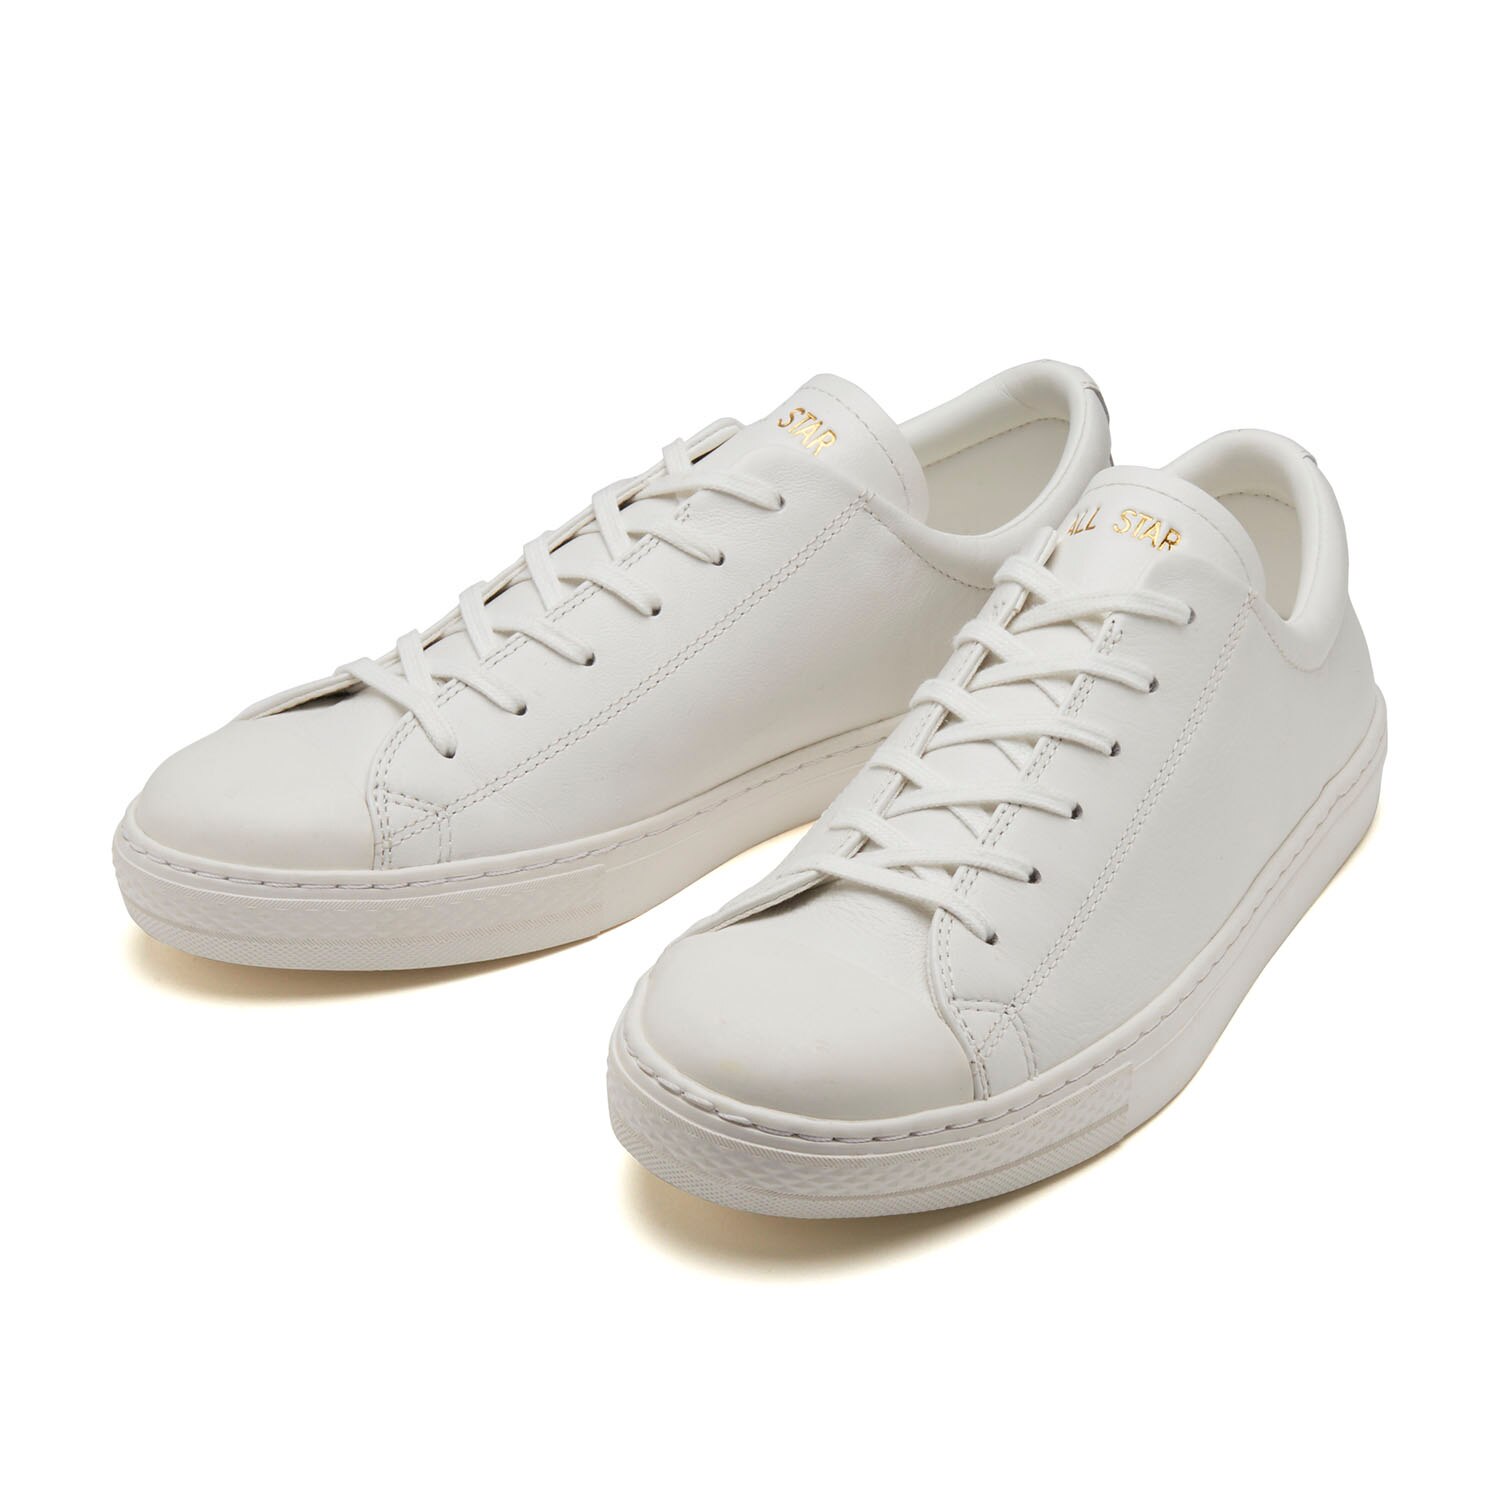 CONVERSE】LEATHER AS COUPE OX|ABC-MART(エービーシー・マート)の通販